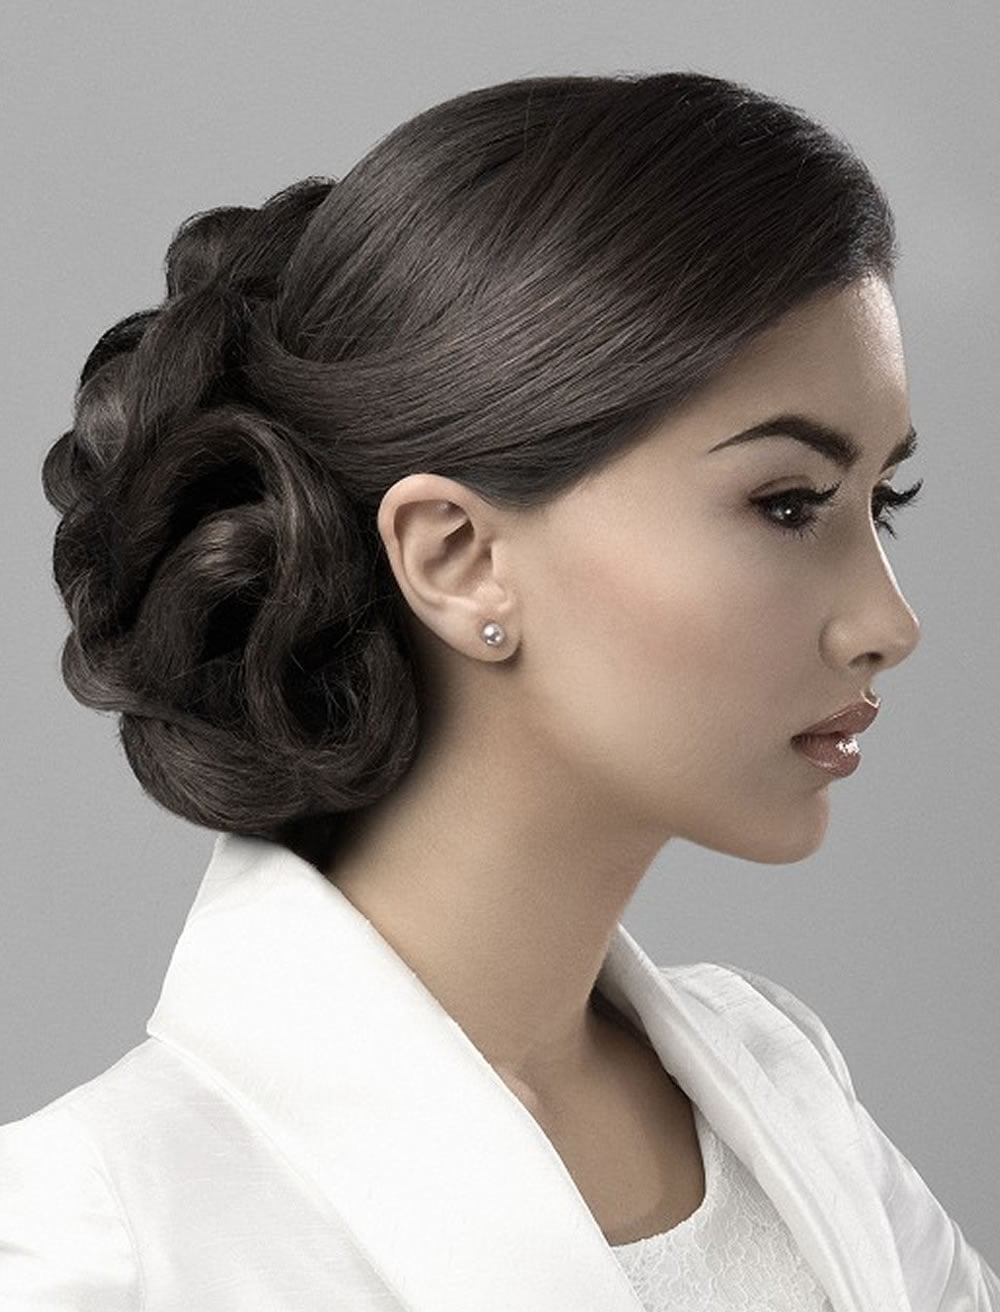 32 Perfect Updo Hairstyles for Prom 2017-2018  Round 